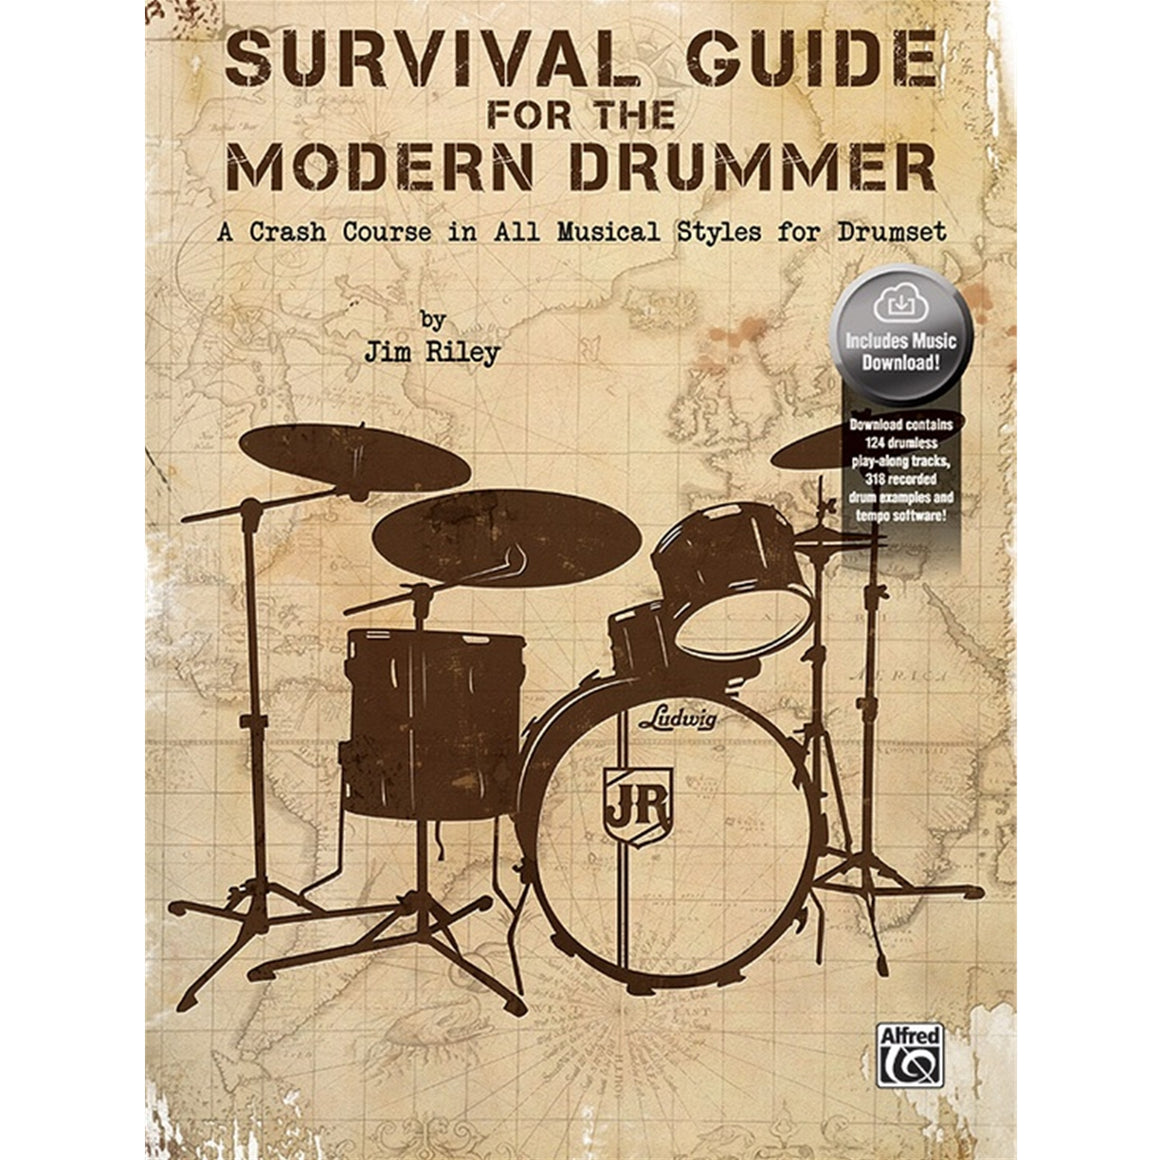 ALFRED 980692284087 Survival Guide for the Modern Drummer